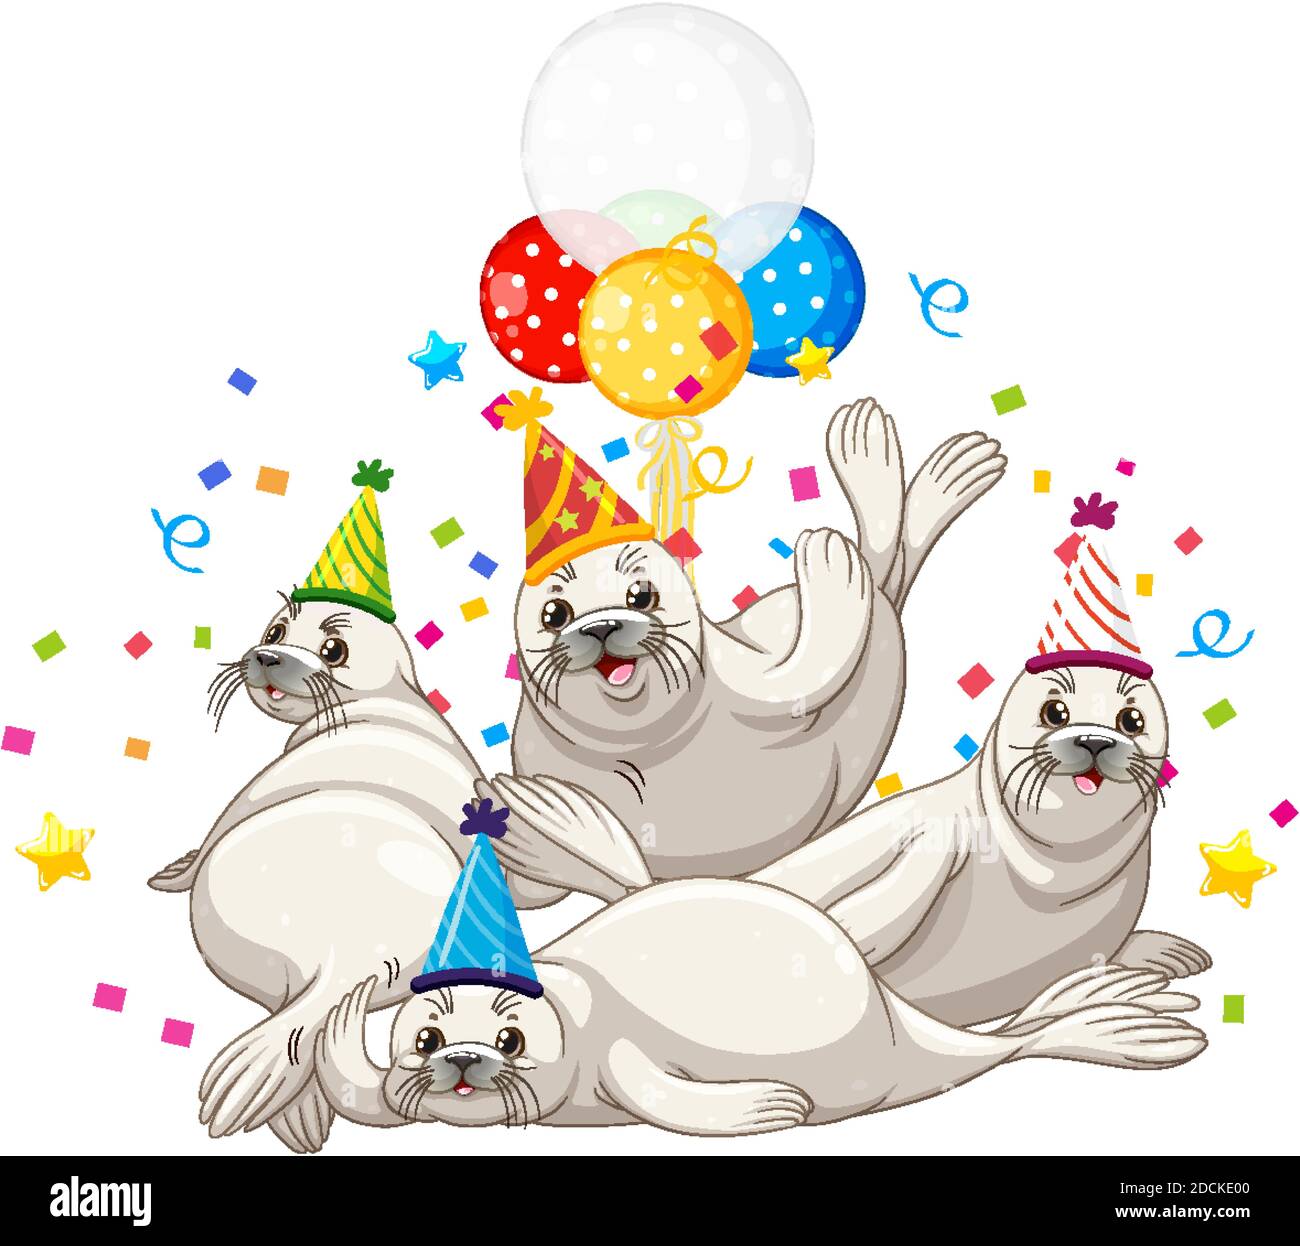 Seal group in party theme cartoon character on white background illustration Stock Vector